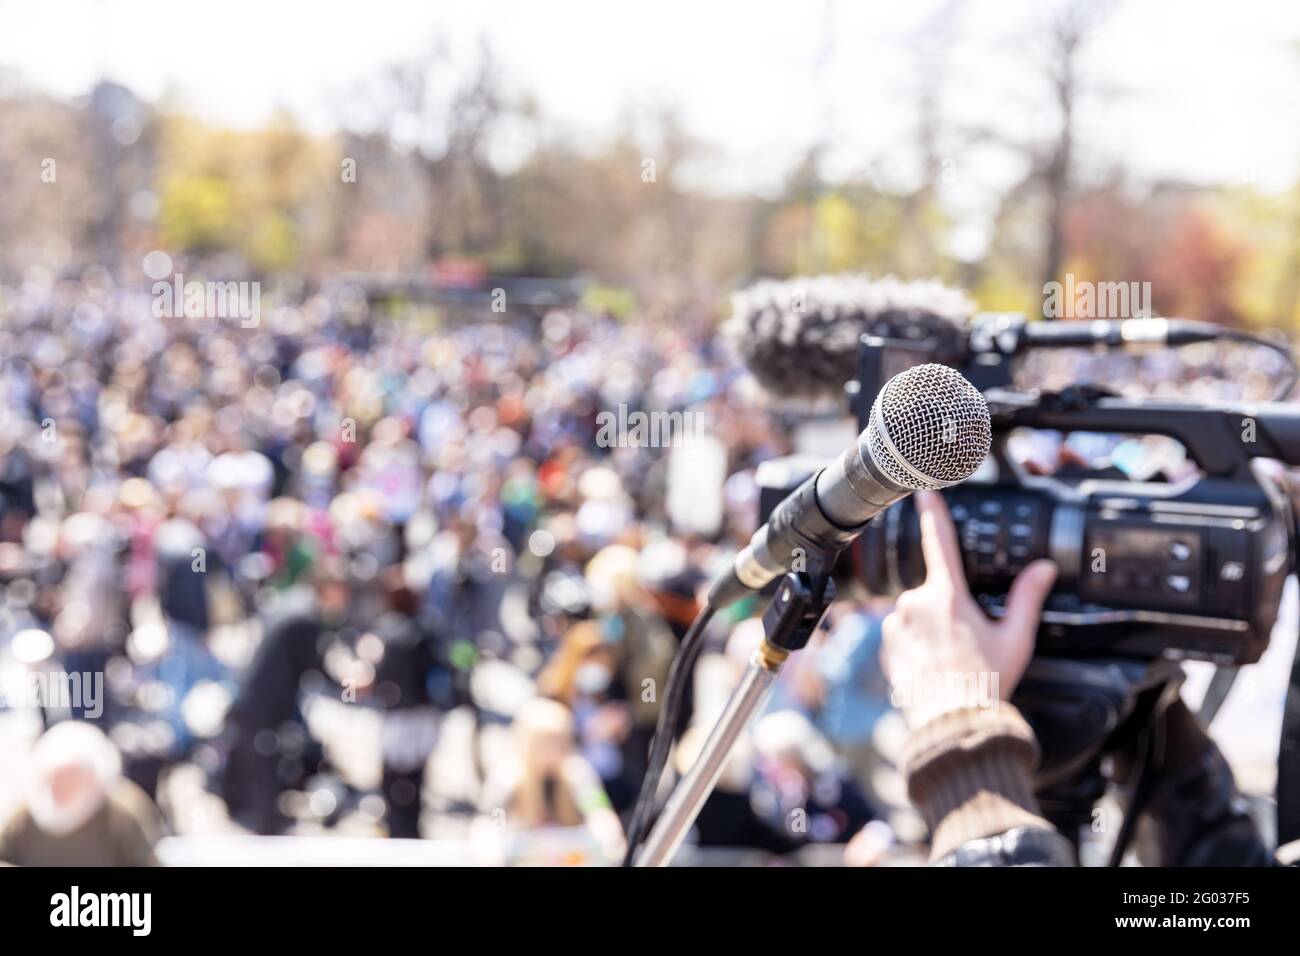 Protest or public demonstration, focus on microphone, blurred group of  people in the background Stock Photo - Alamy